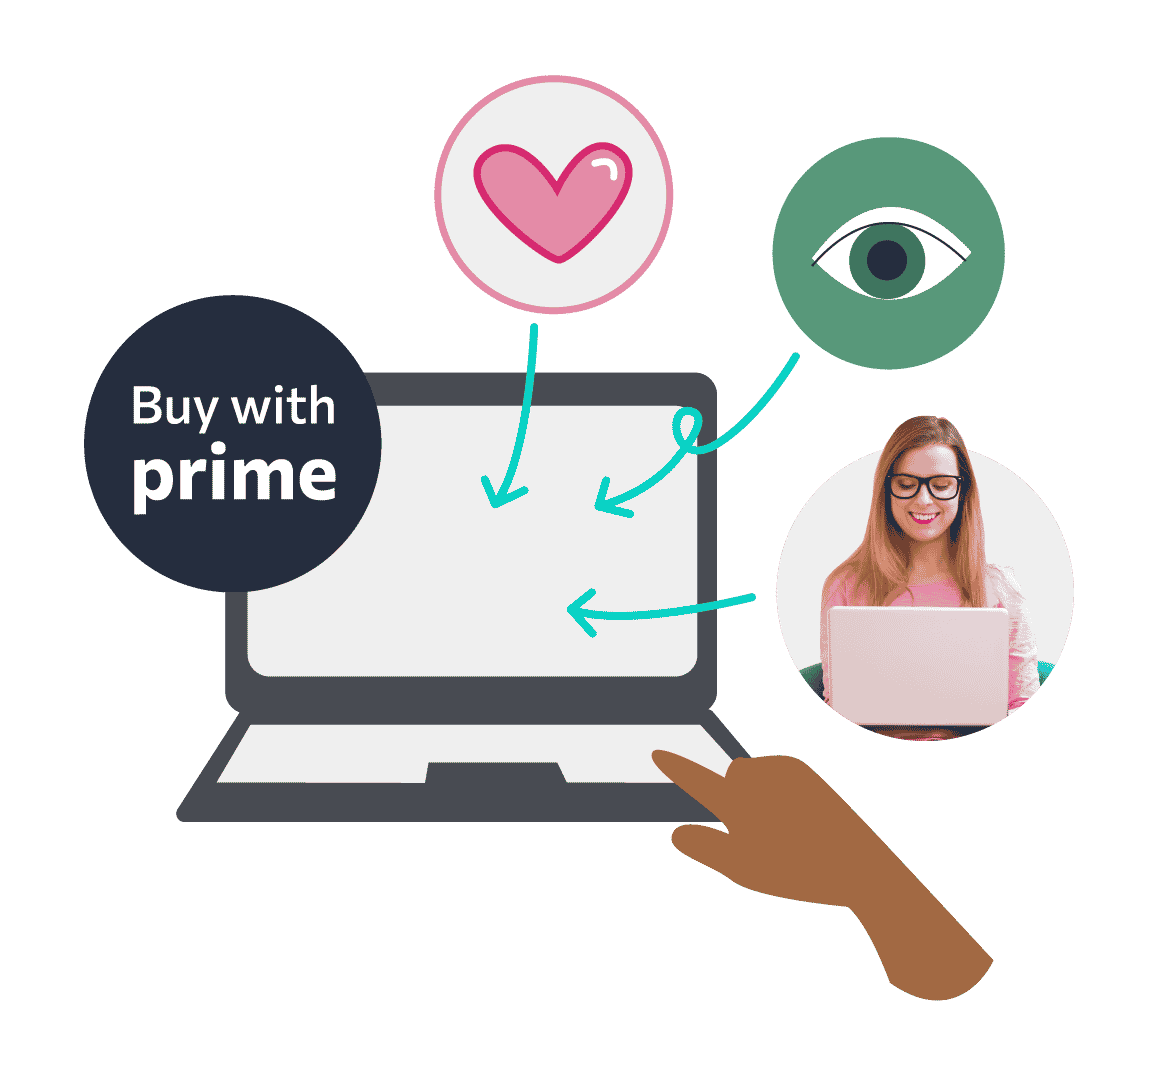 Set Up Buy with Prime